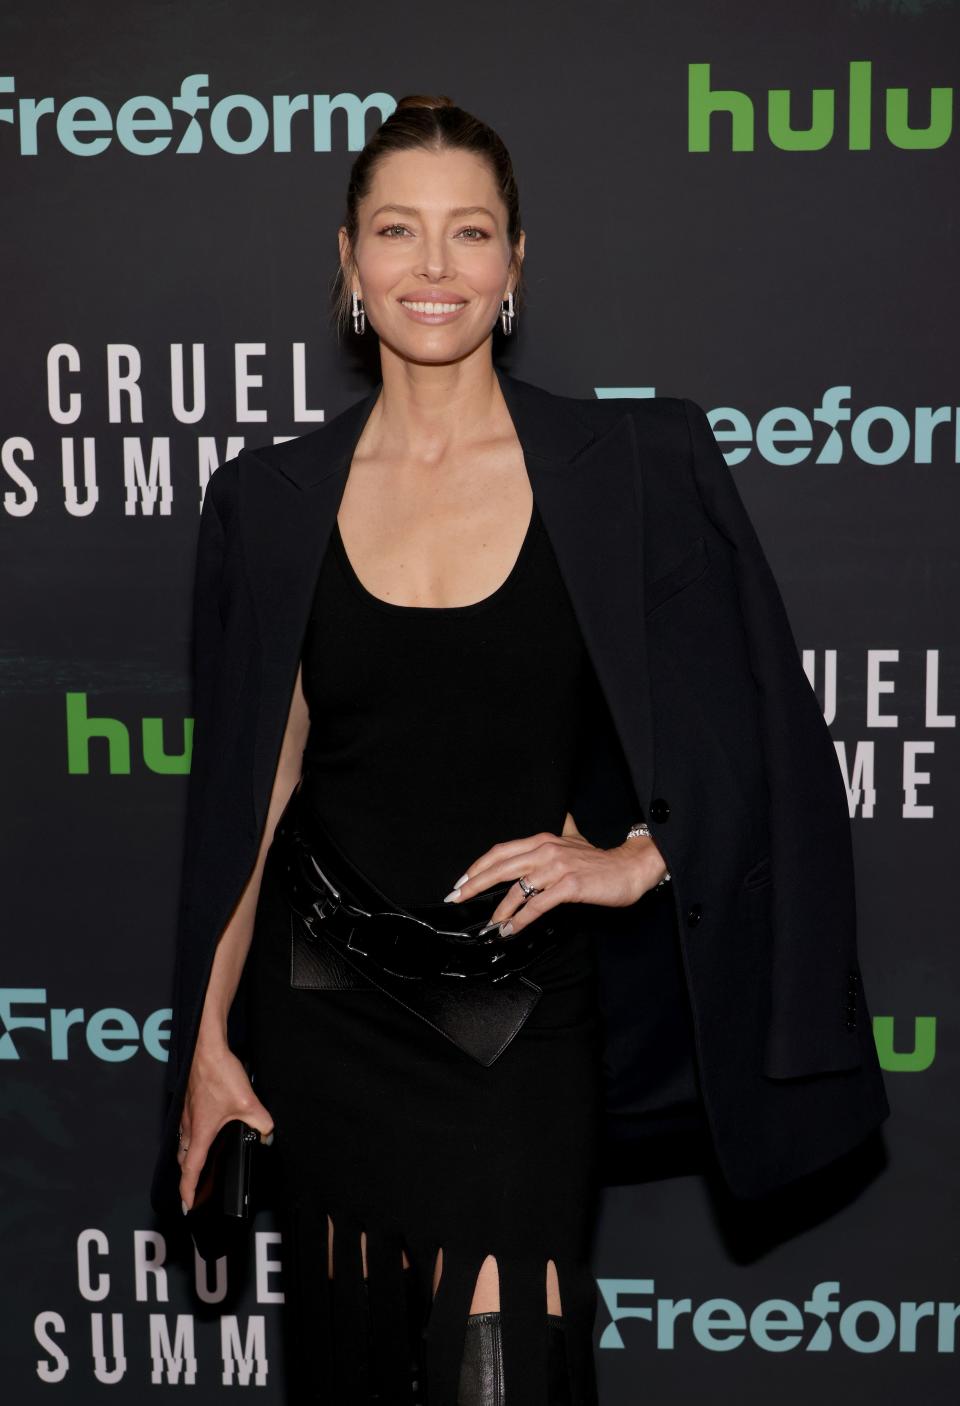 LOS ANGELES, CALIFORNIA - MAY 31: Jessica Biel attends the premiere of Freeform's "Cruel Summer" Season 2 at Grace E. Simons Lodge on May 31, 2023 in Los Angeles, California. (Photo by David Livingston/Getty Images)